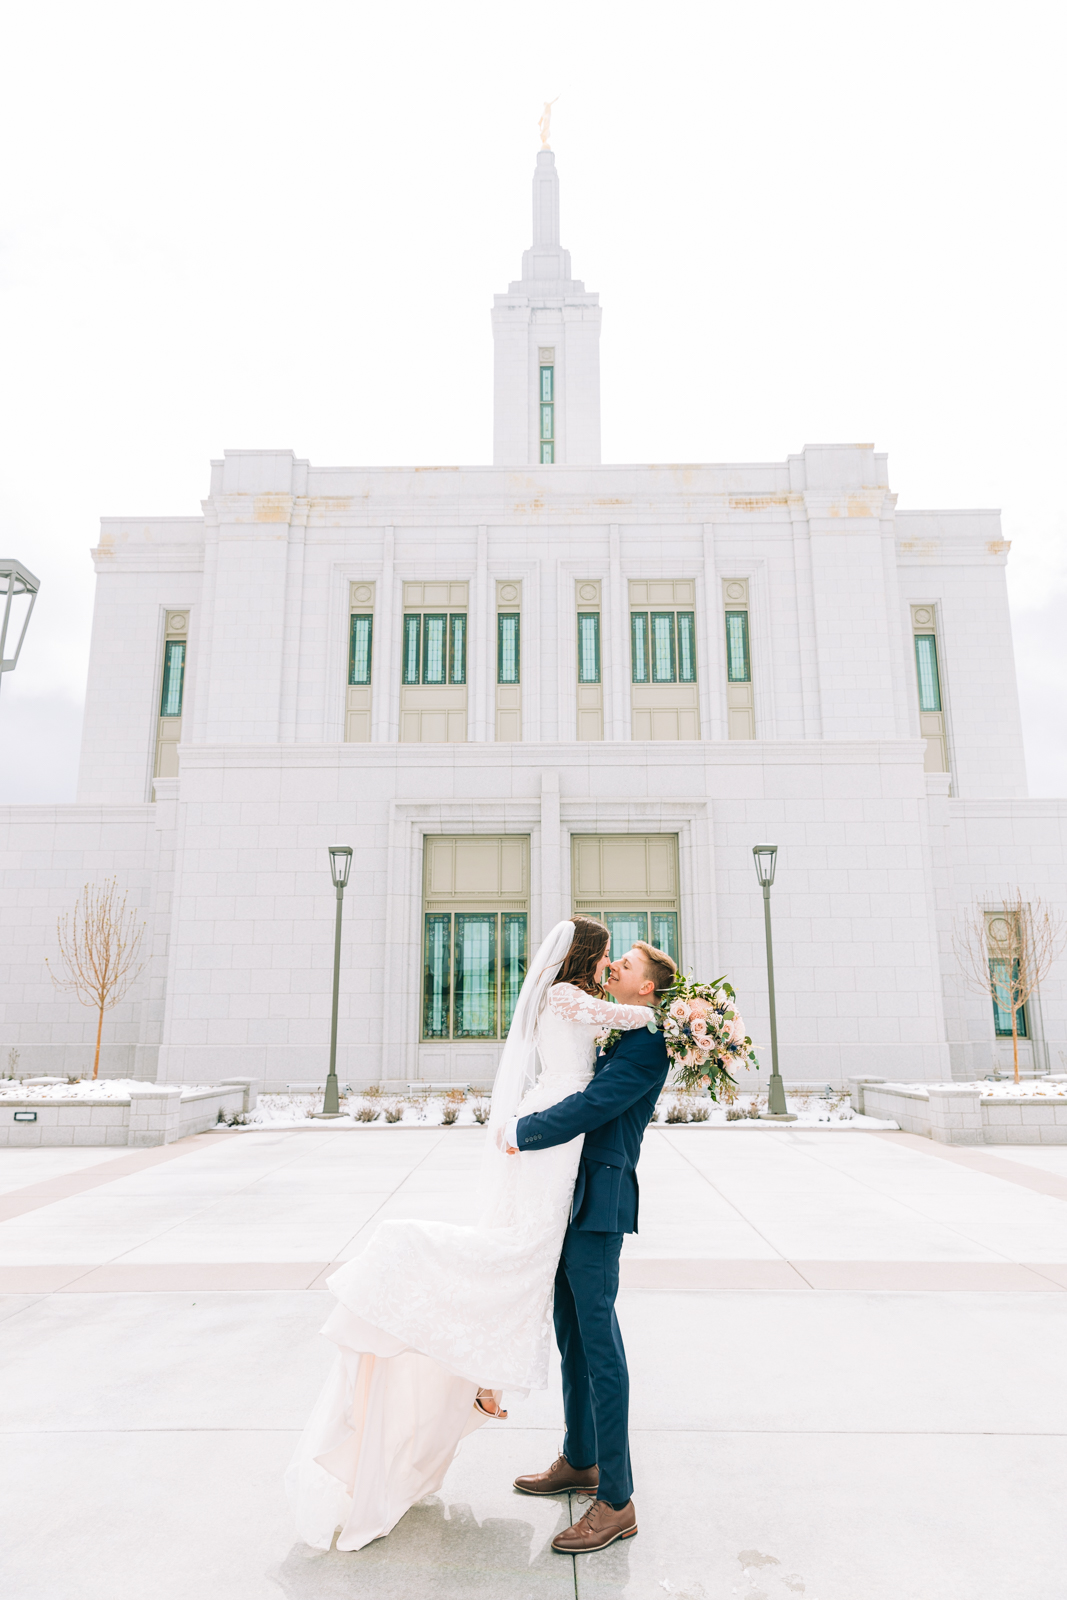 Jackson Hole wedding photographer captures leaping into love bride and groom